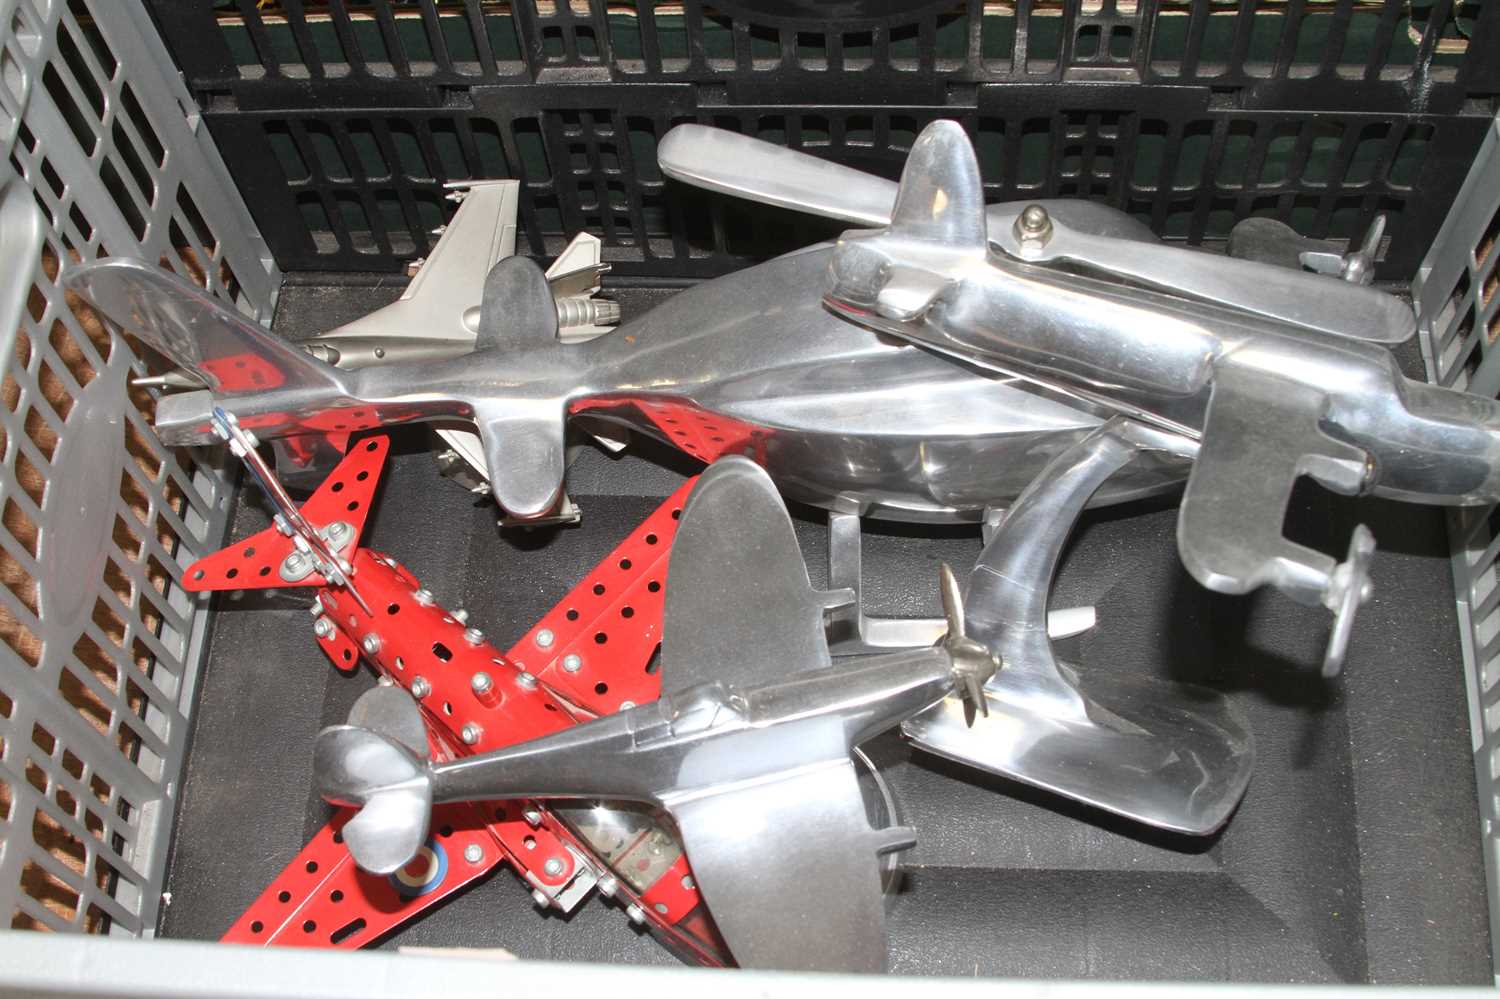 A polished aluminium model of a helicopter, length 38cm, together with four model aeroplanes